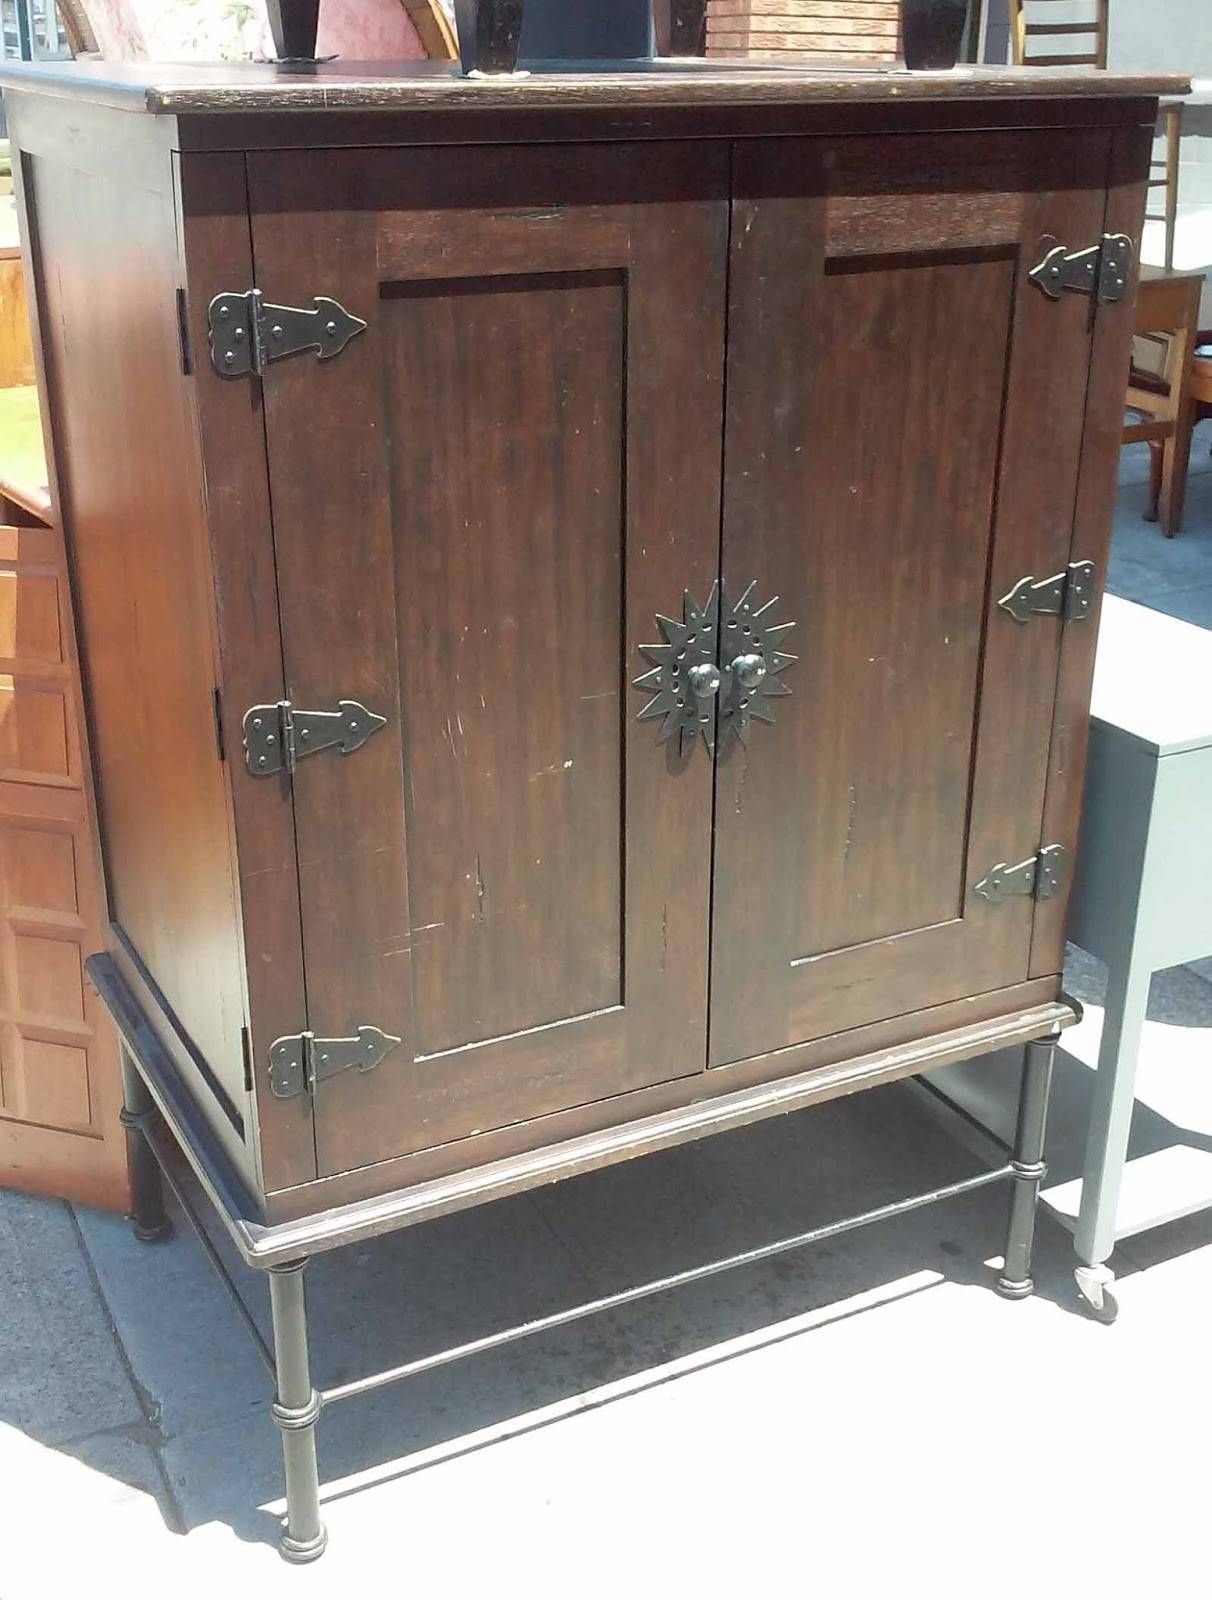 Uhuru Furniture & Collectibles: Sold Modern Asian Espresso Tv Pertaining To Asian Tv Cabinets (View 8 of 15)